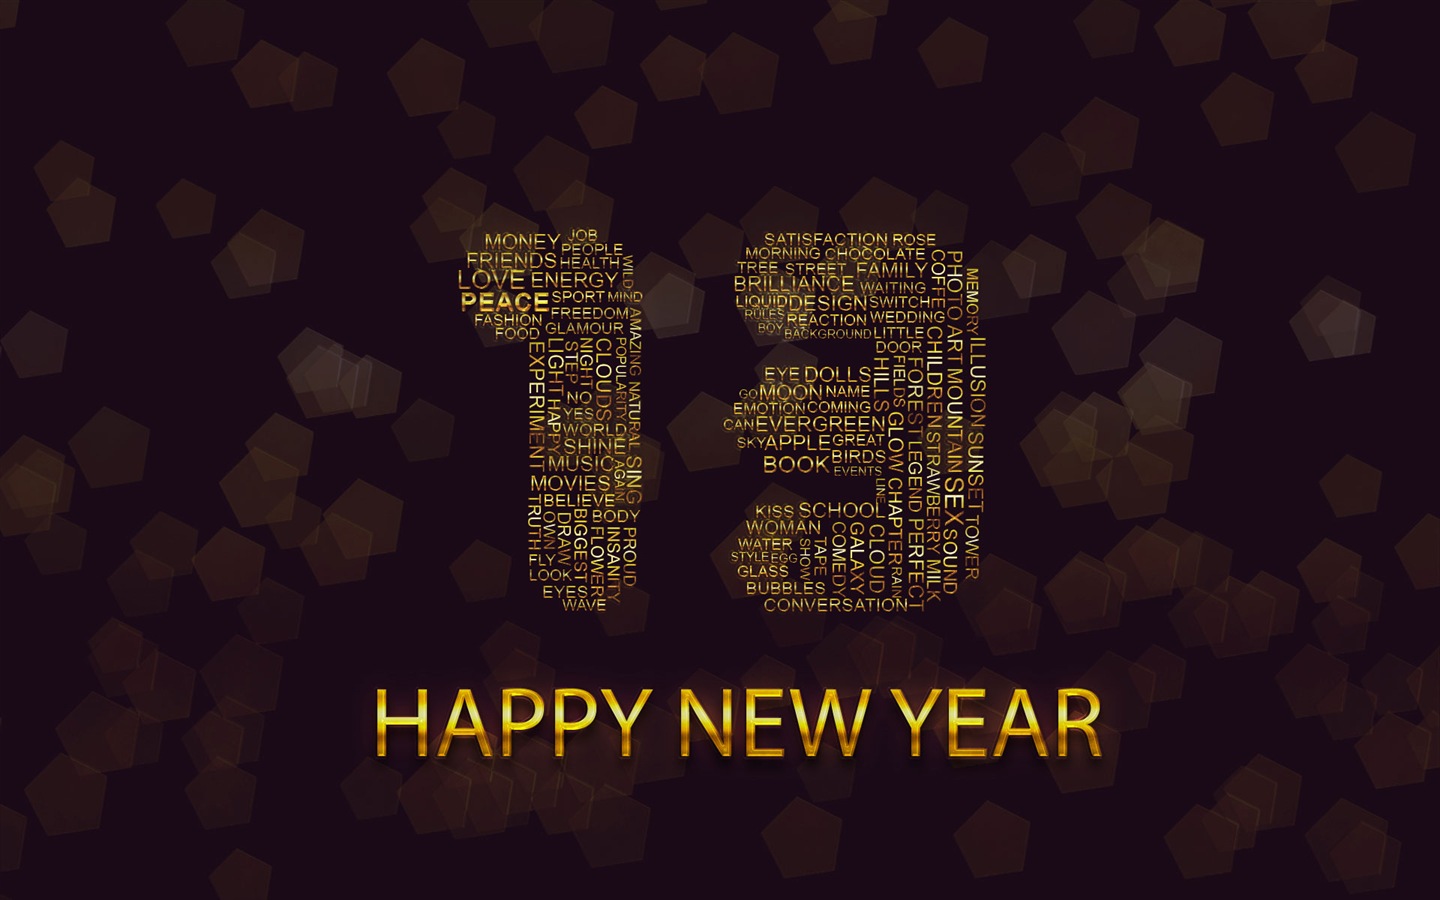 2013 Happy New Year HD wallpapers #12 - 1440x900